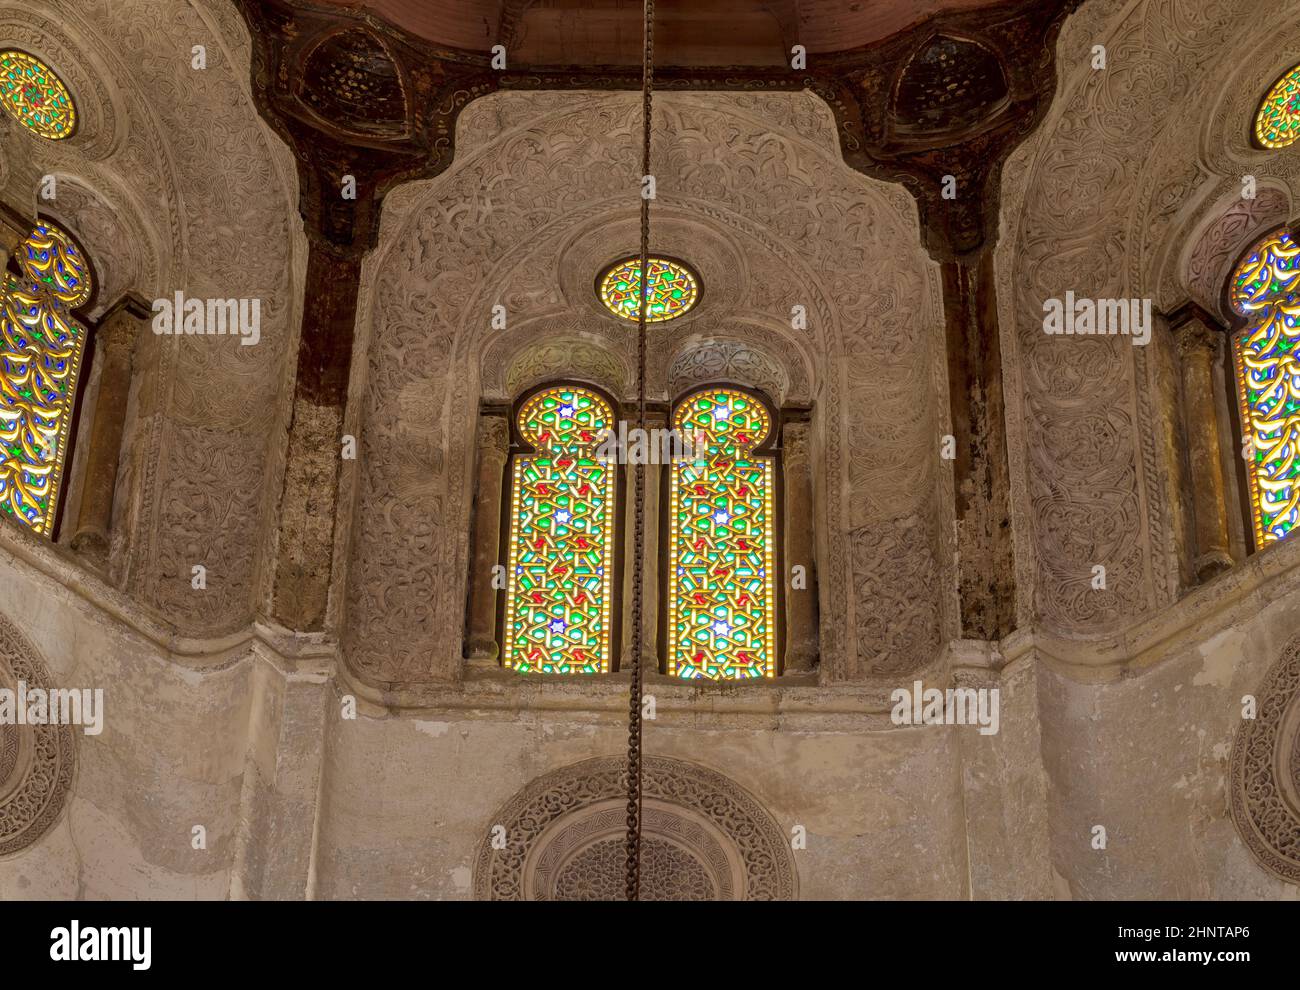 Skylight with perforated stucco arched windows decorated with colorful stain glass, at Qalawun complex, Cairo, Egypt Stock Photo